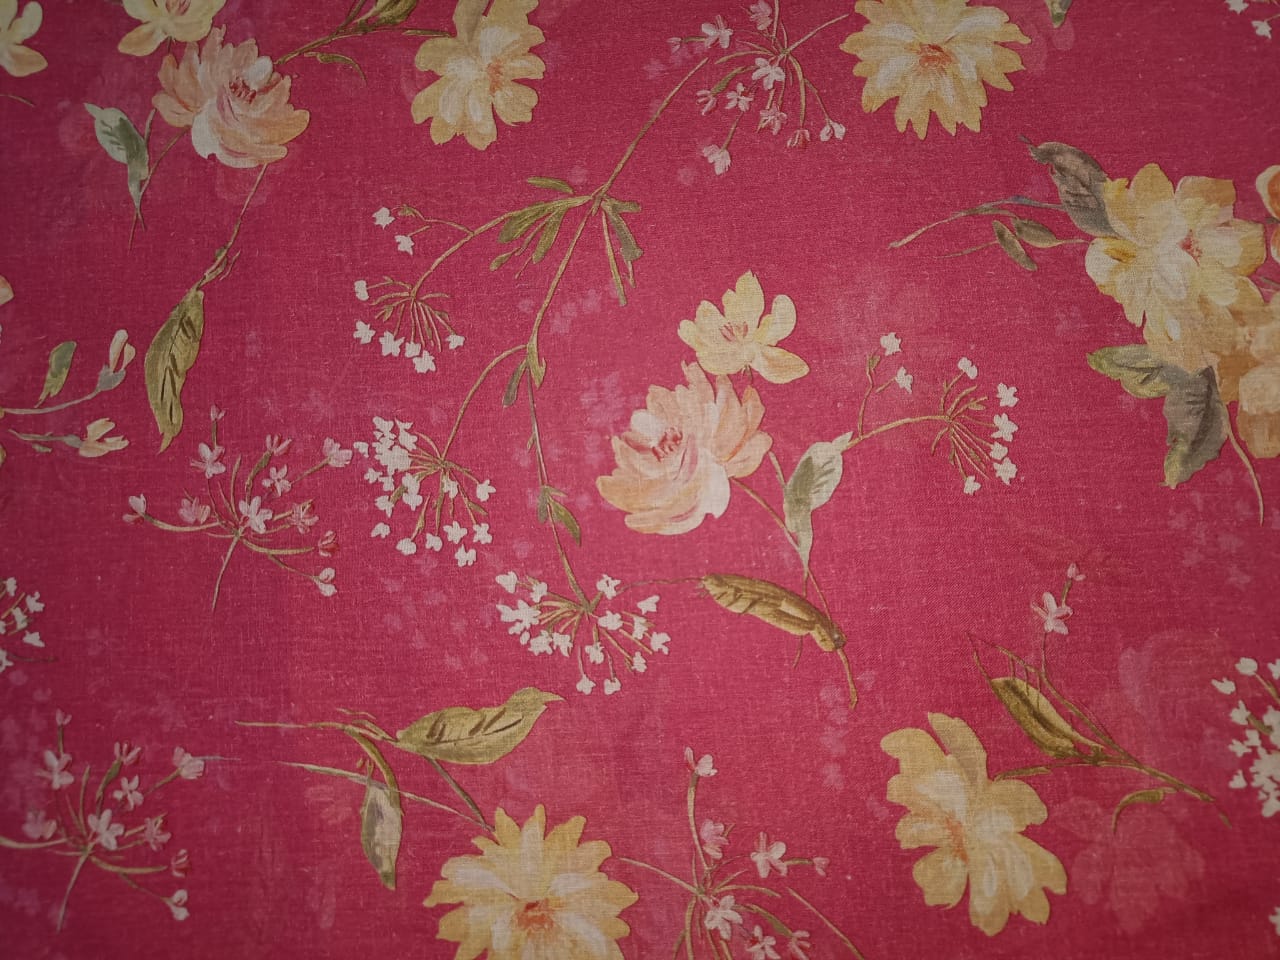 100% linen Floral  print 44" wide available in Beige brown, Watermelon pink, Yellow, Green [15410-15412]